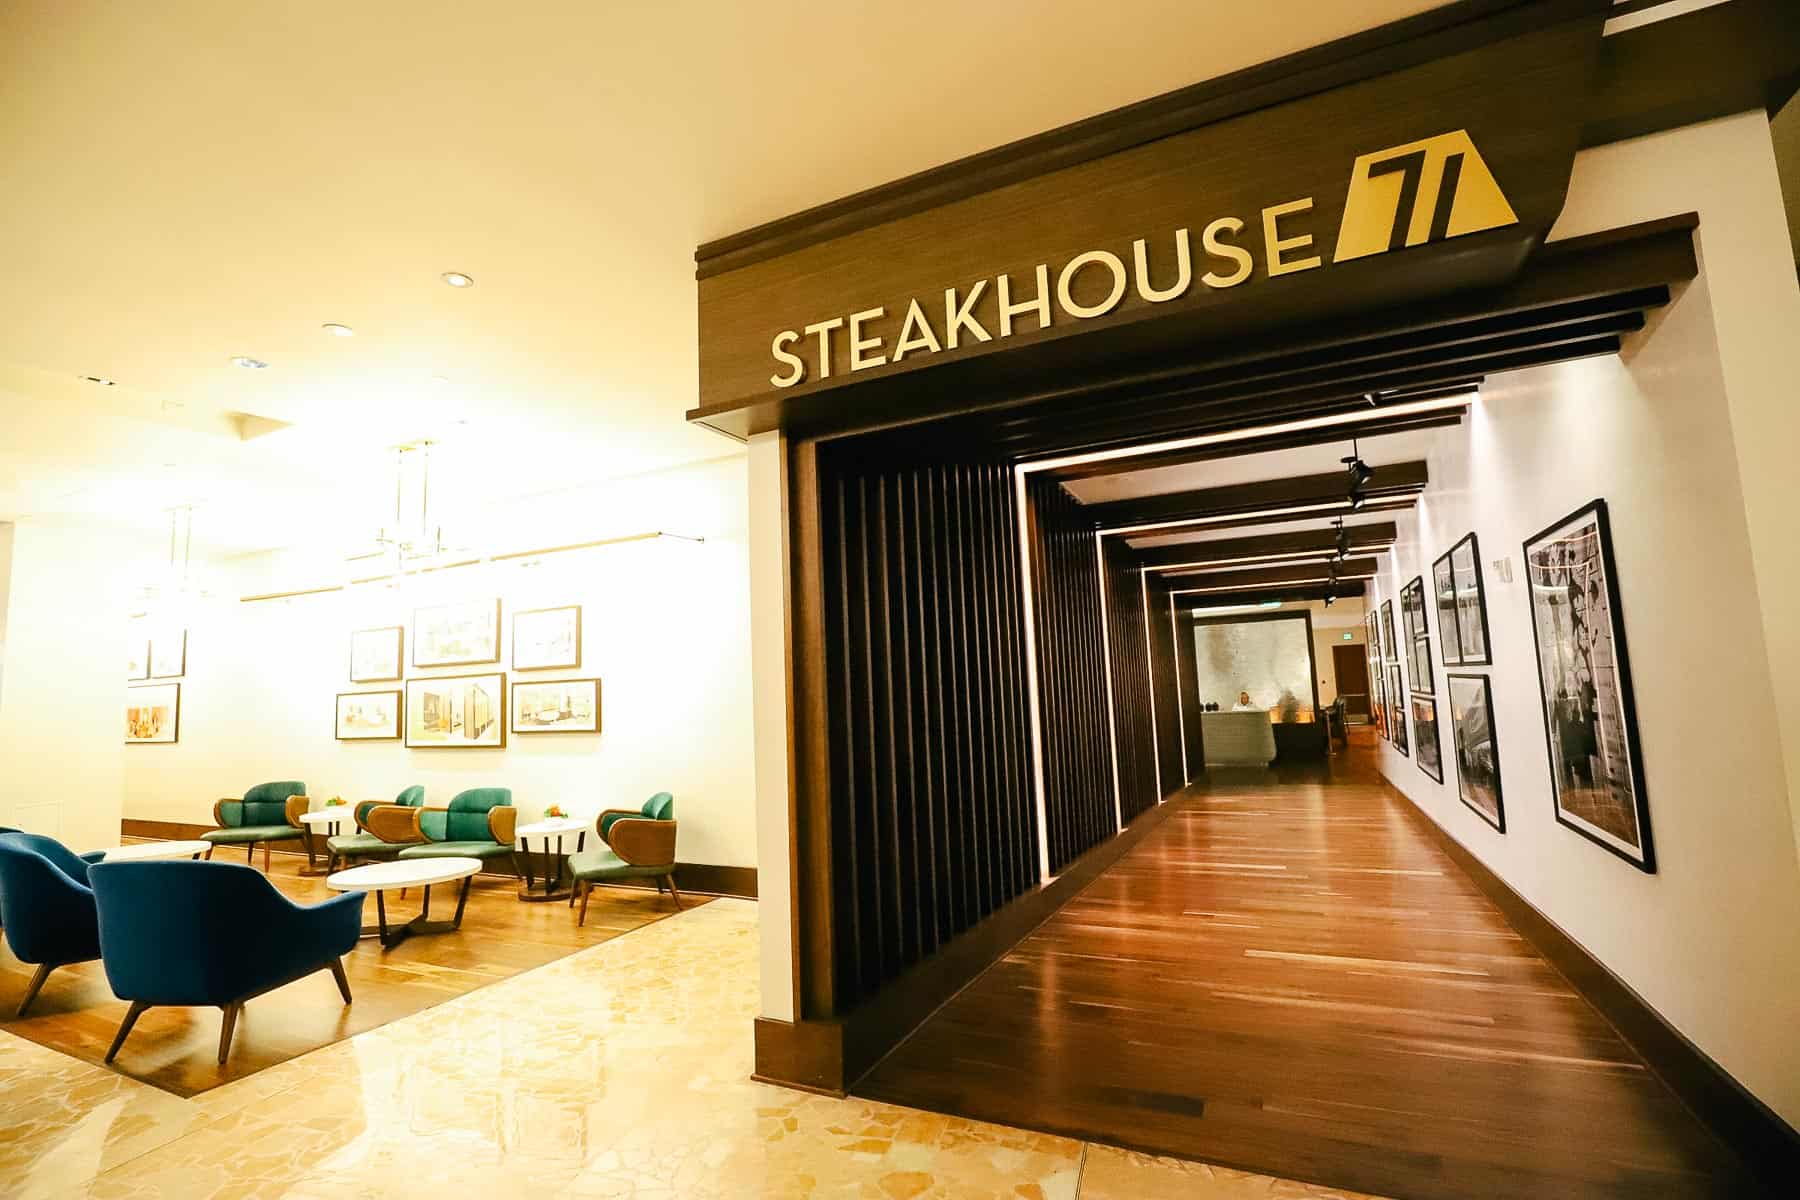 Mobile Orders from Steakhouse 71